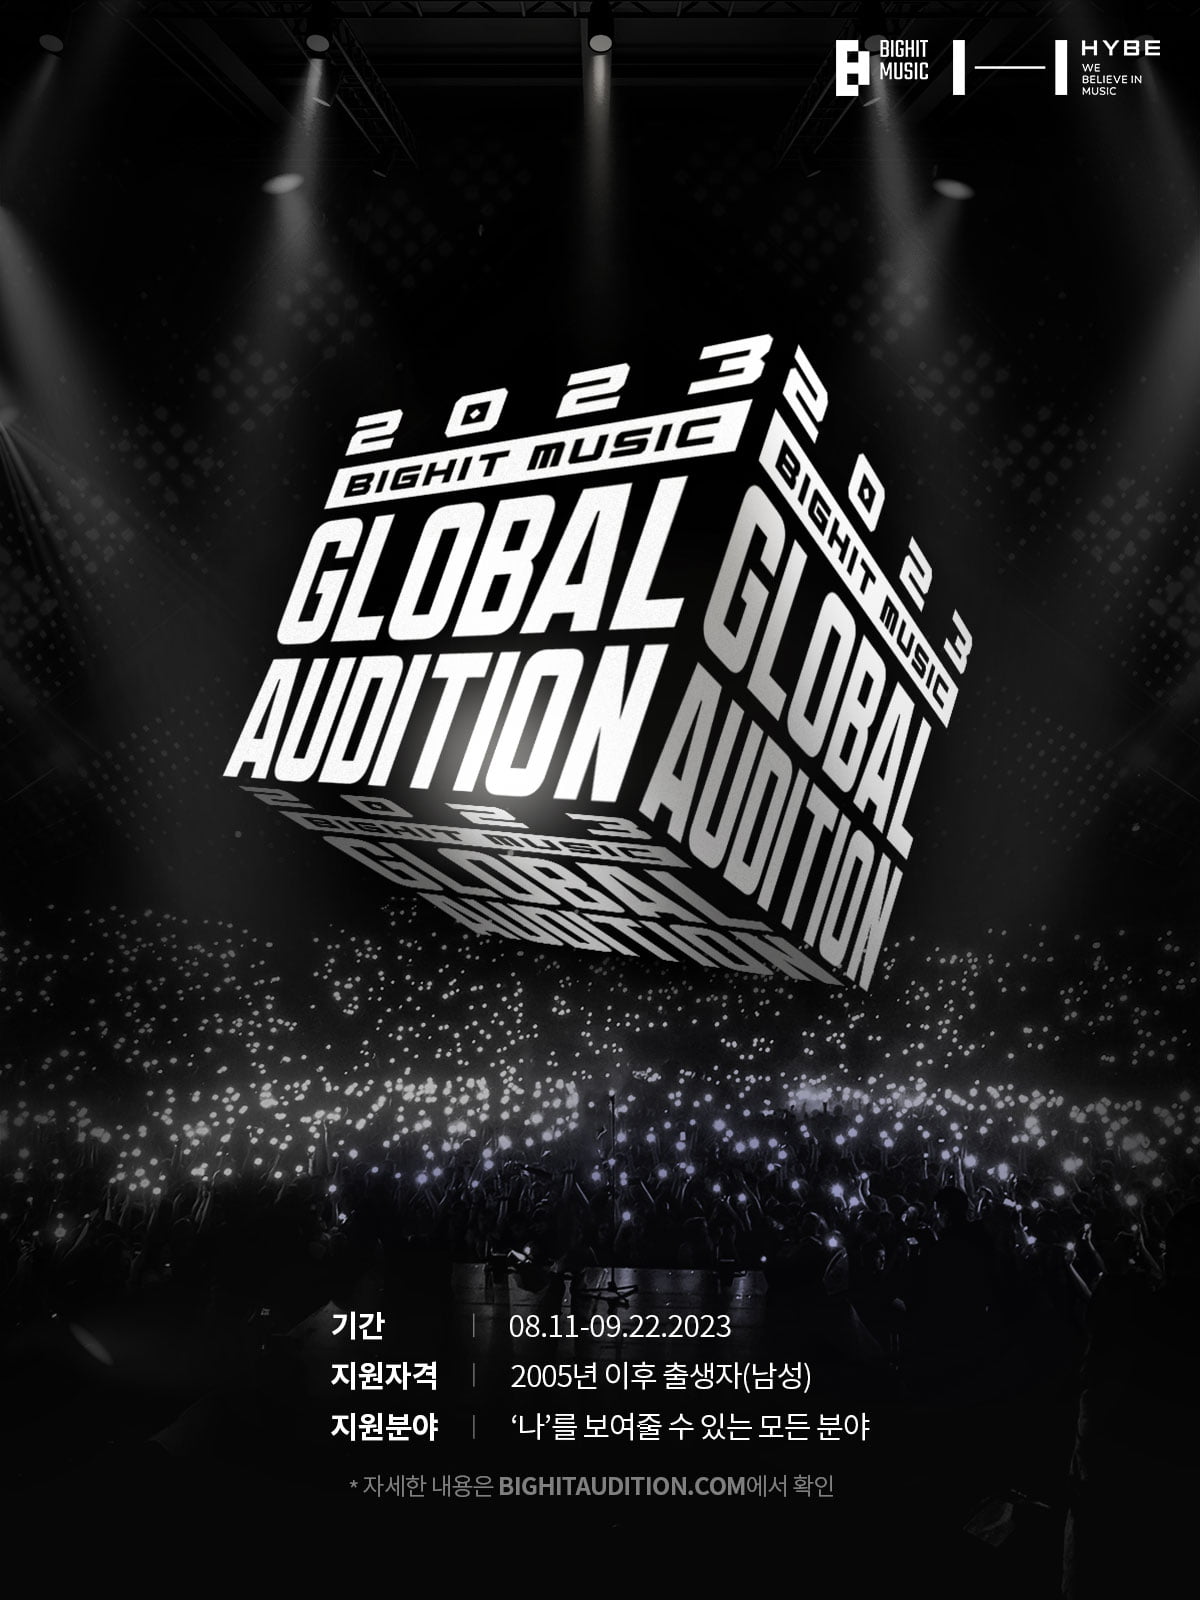 Entertainment Big Hit Music to hold new boy group auditions